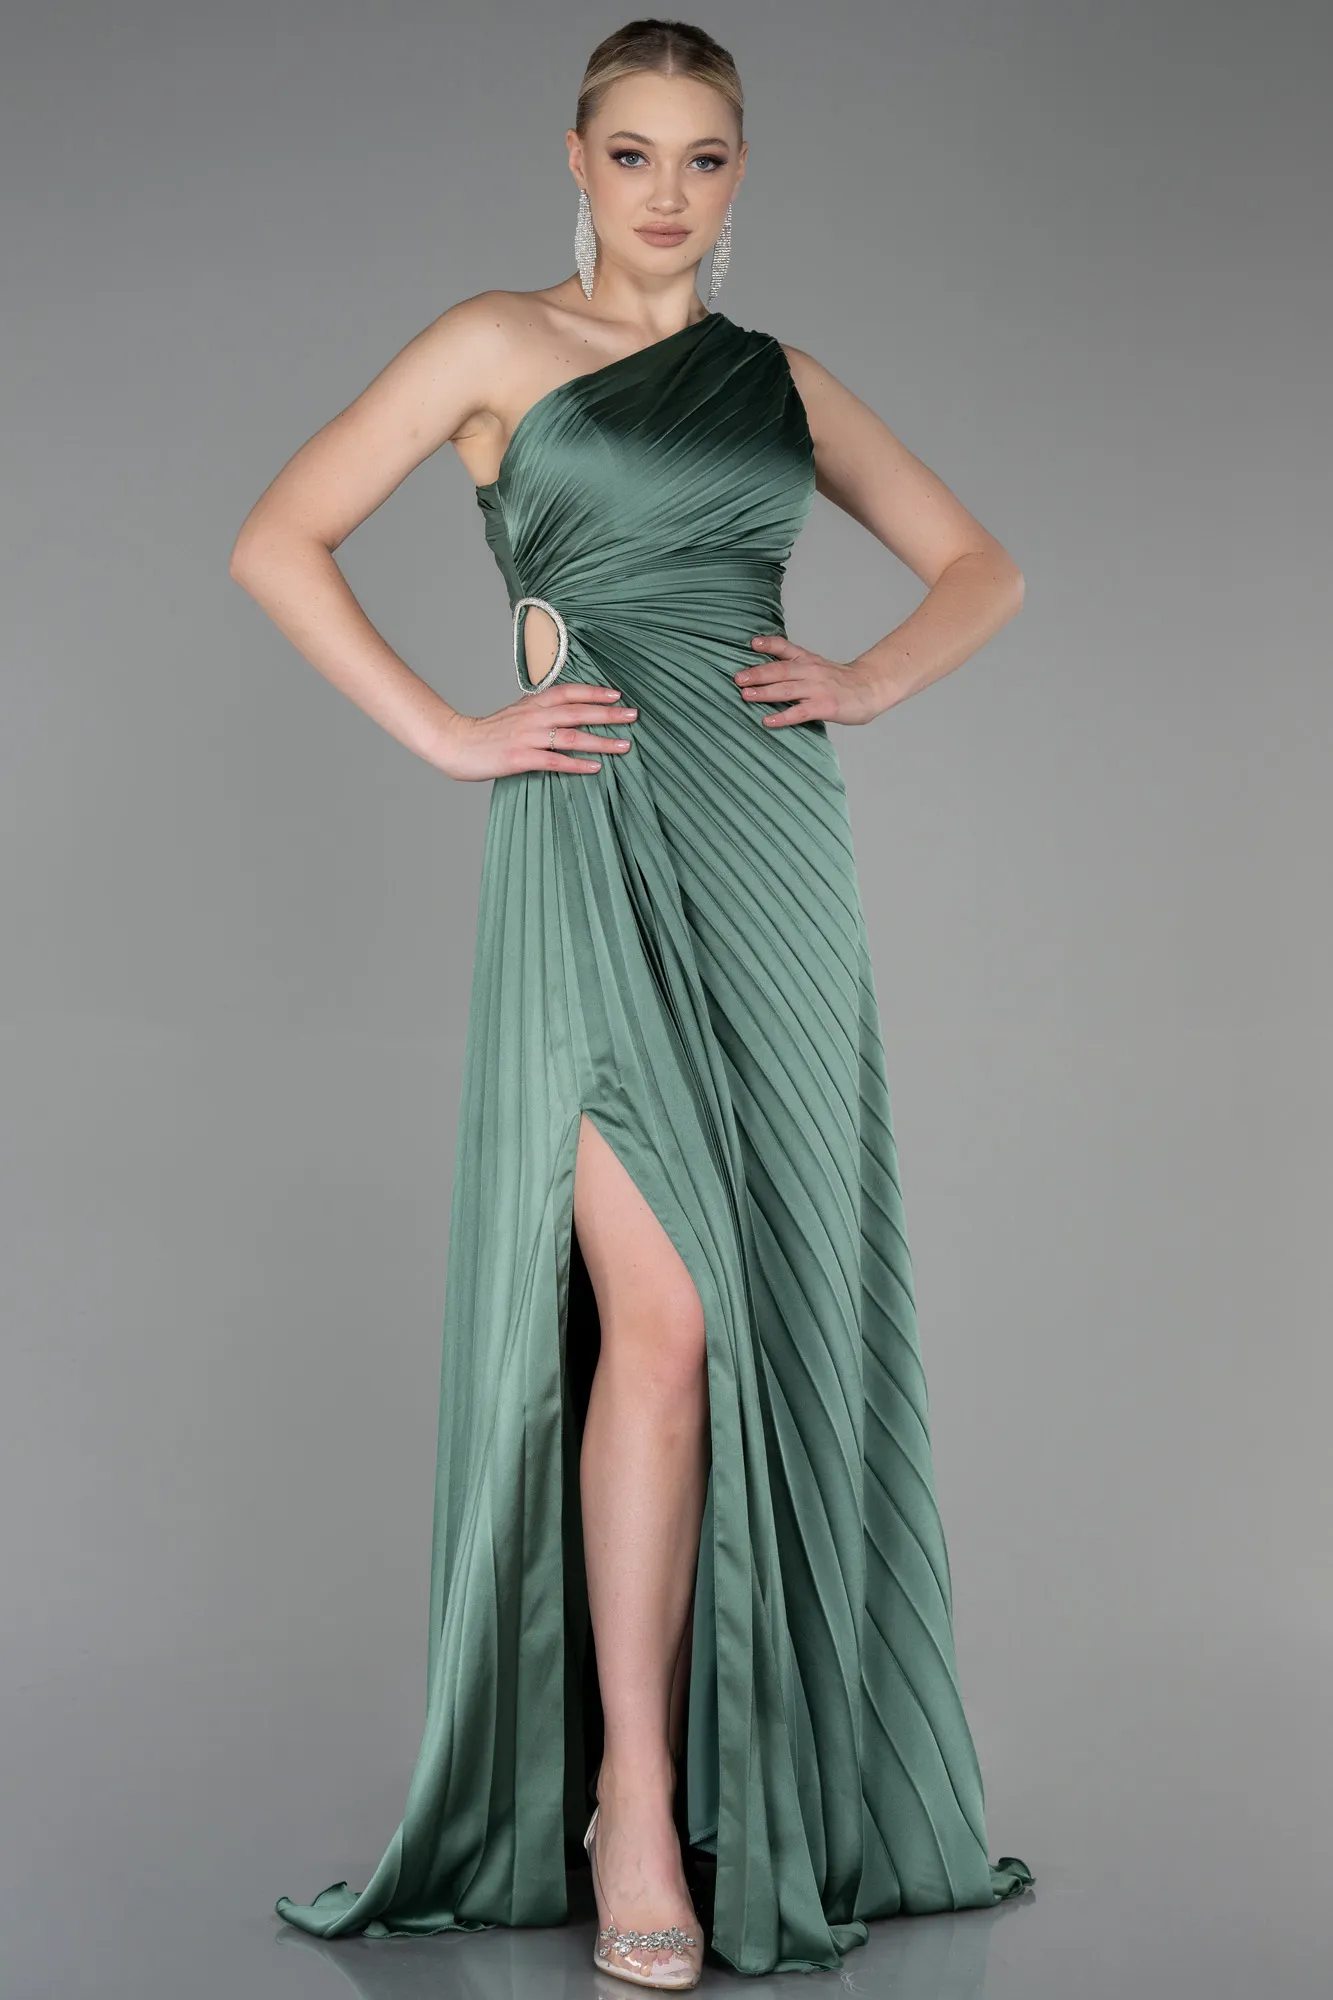 Olive Drab-Long Satin Prom Gown ABU3159